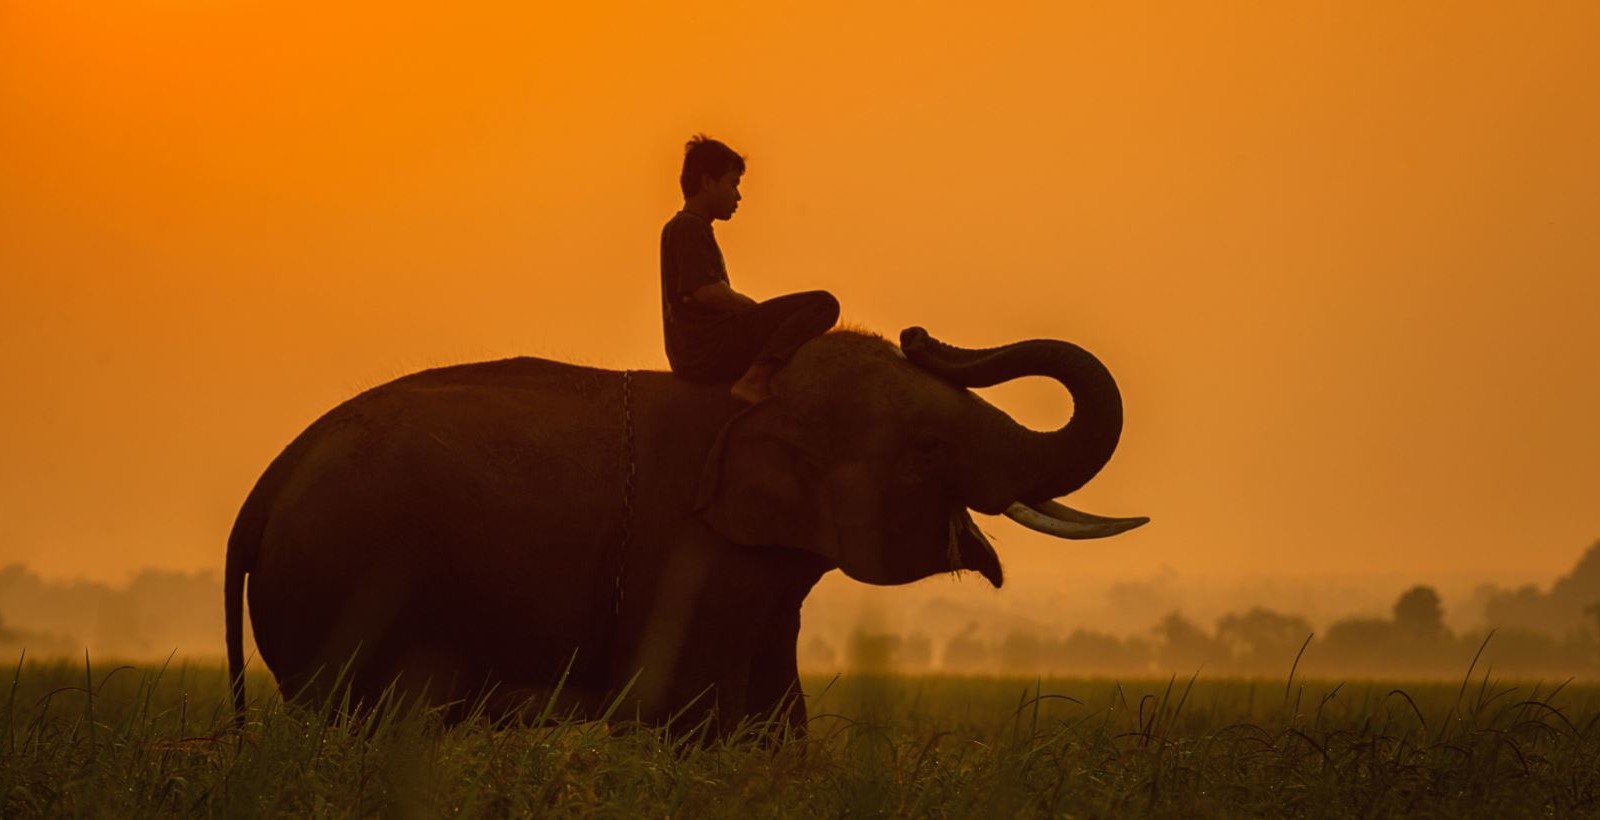 Rider and Elephant in Sunset